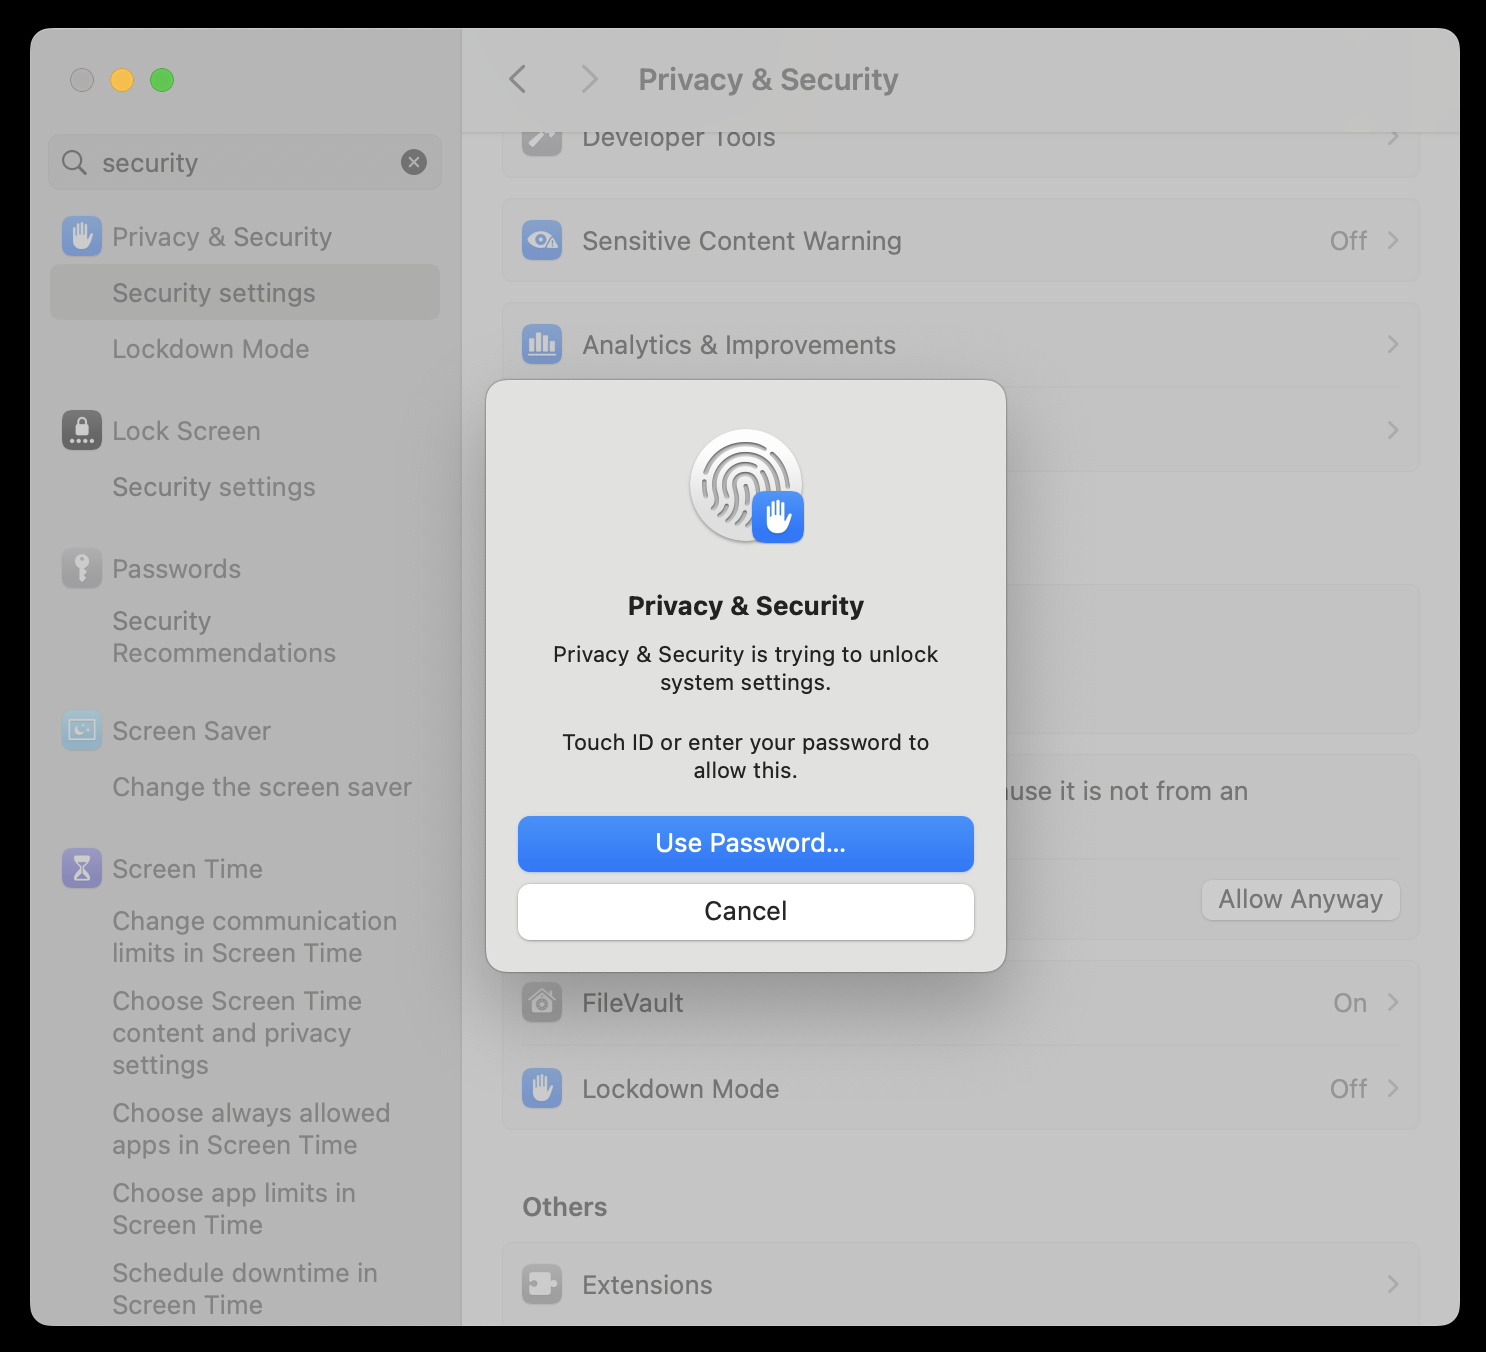 Allow life-export by using your password or touchid